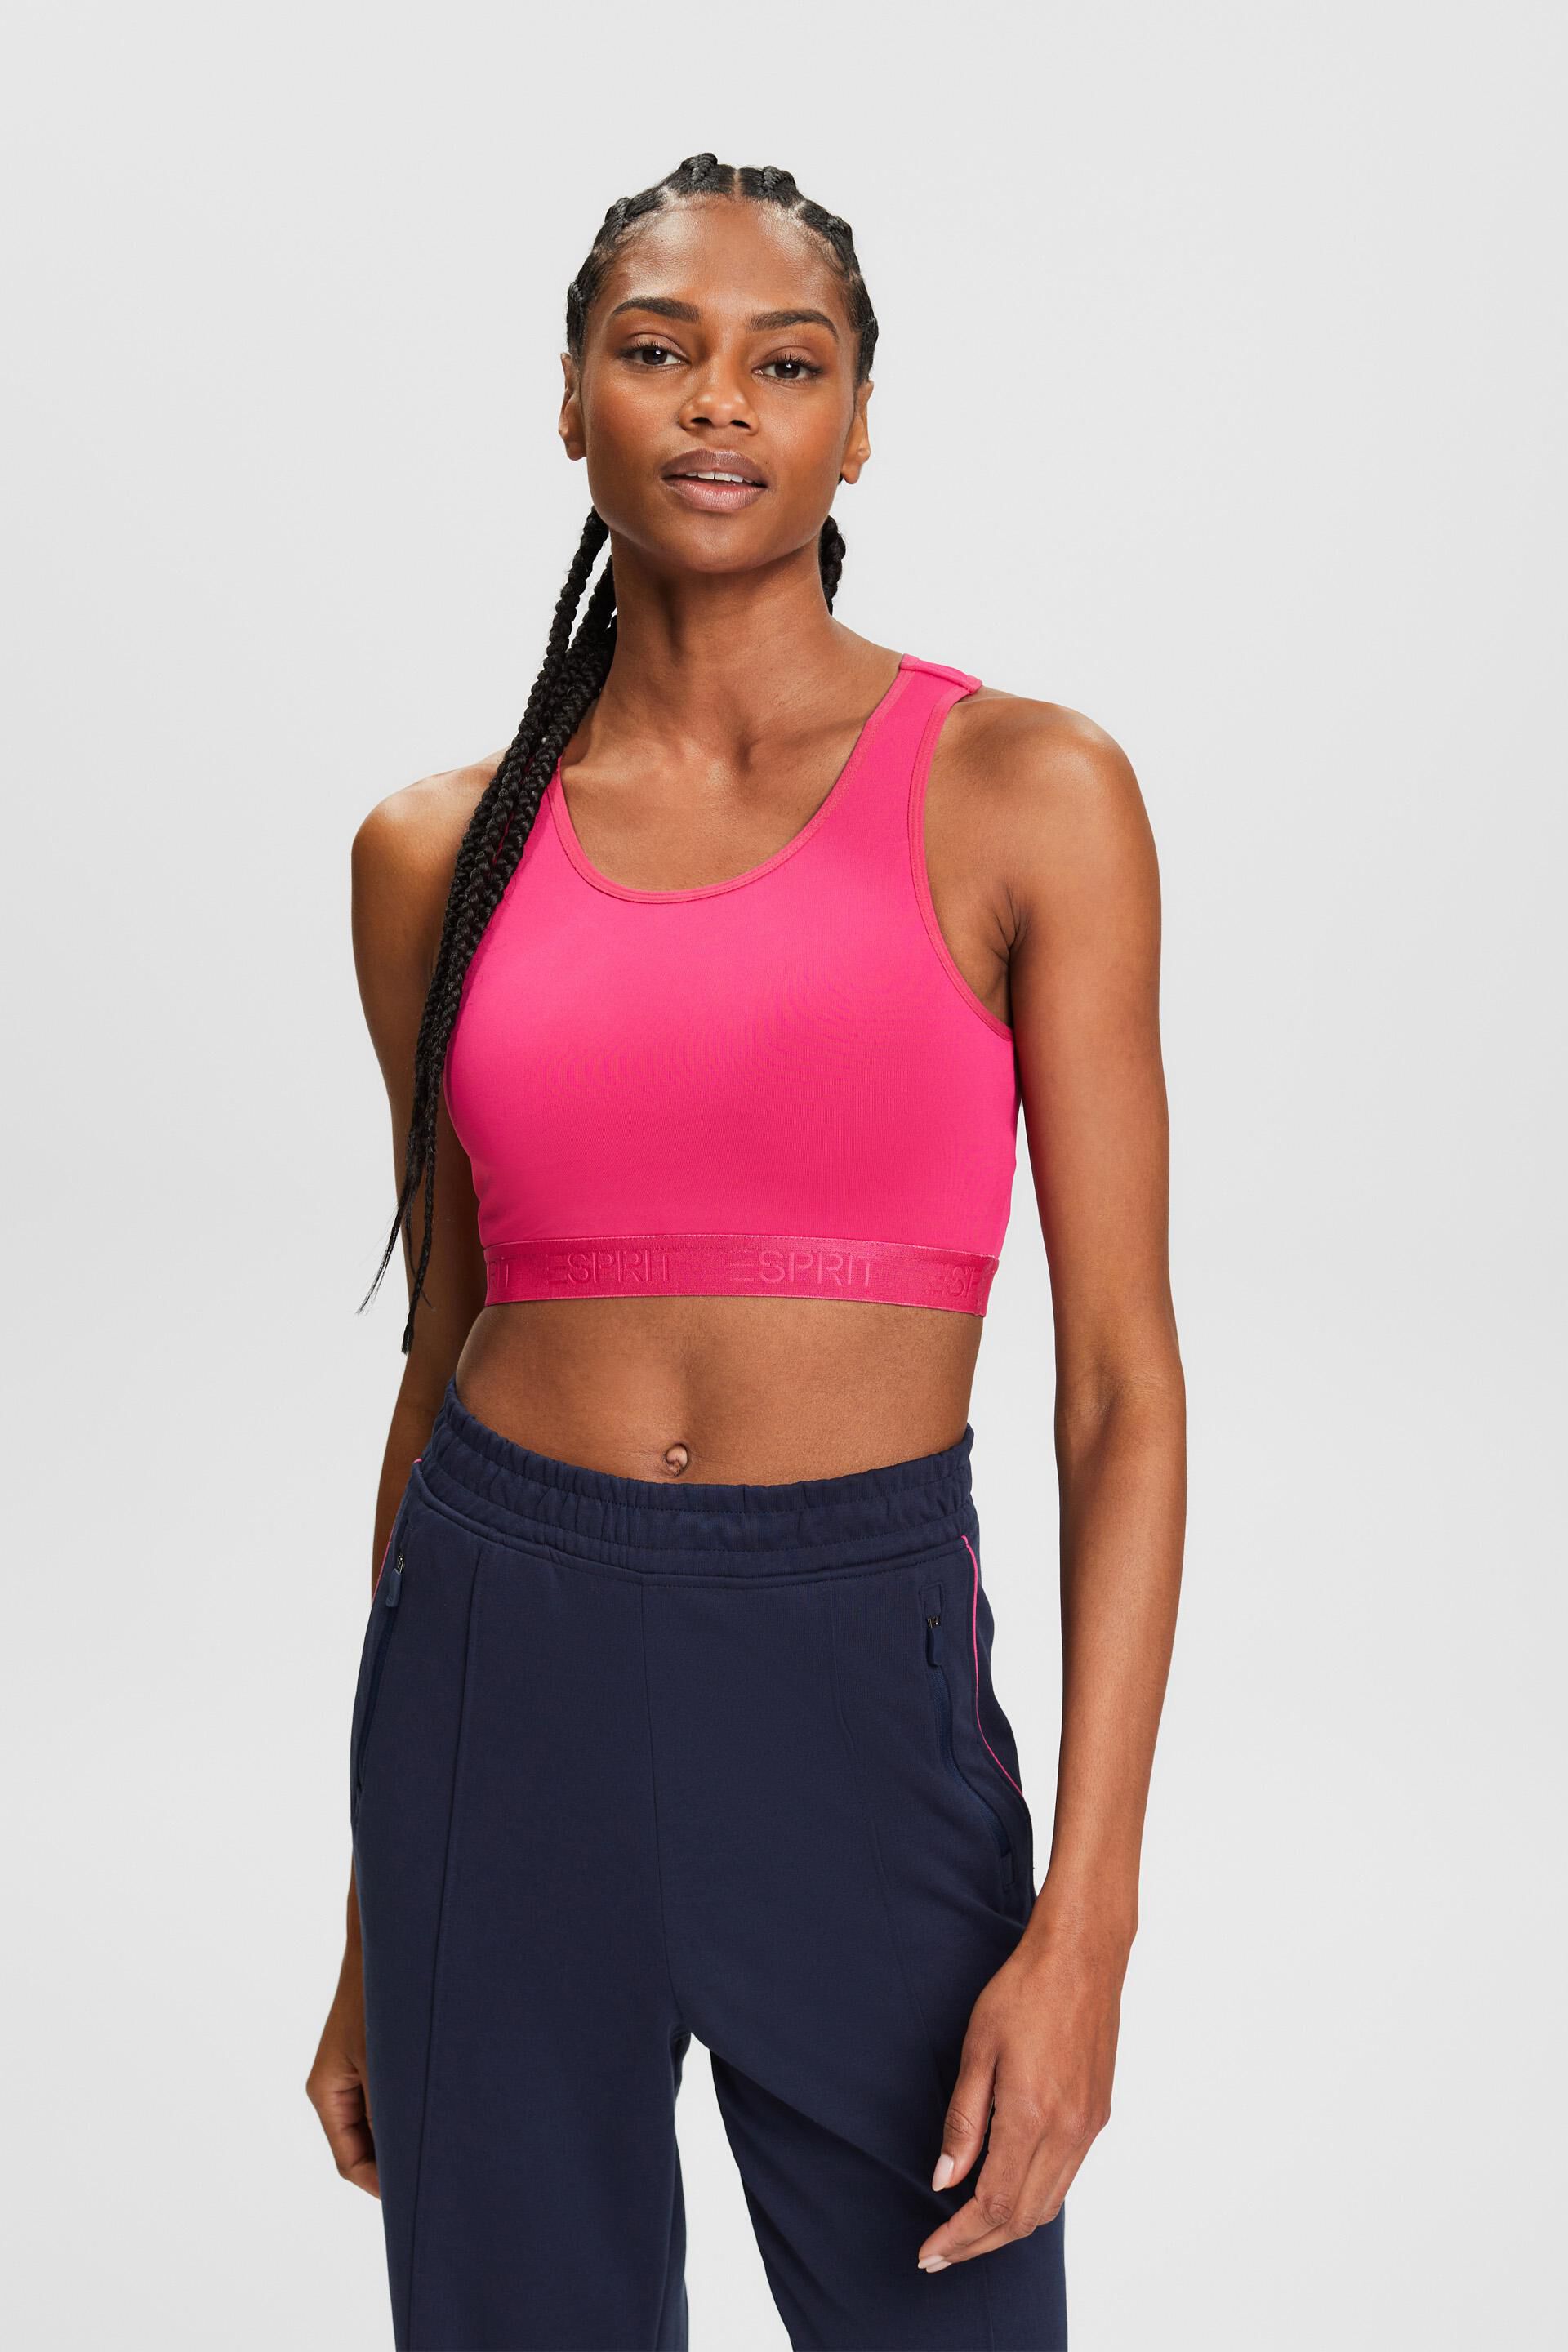 Seamless Padded Athletic Vest For Women Popular Gym Fitness Cotton Sports  Bra With Stretch Cotton Fabric And Sexy Sporty Design Included From  Vivian5168, $4.06